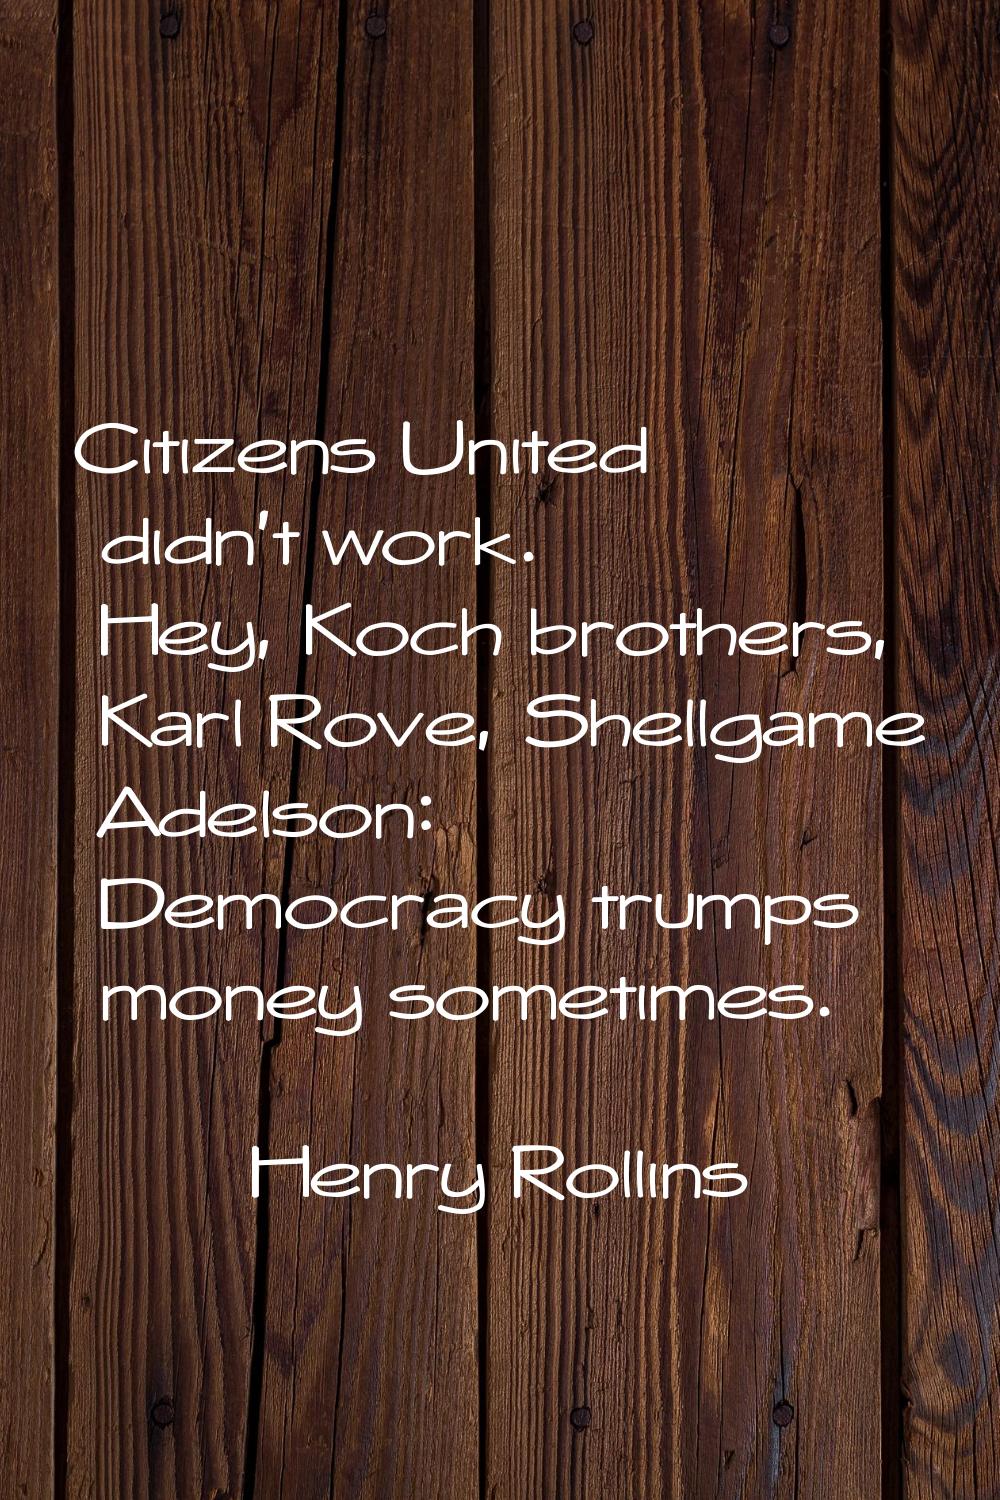 Citizens United didn't work. Hey, Koch brothers, Karl Rove, Shellgame Adelson: Democracy trumps mon